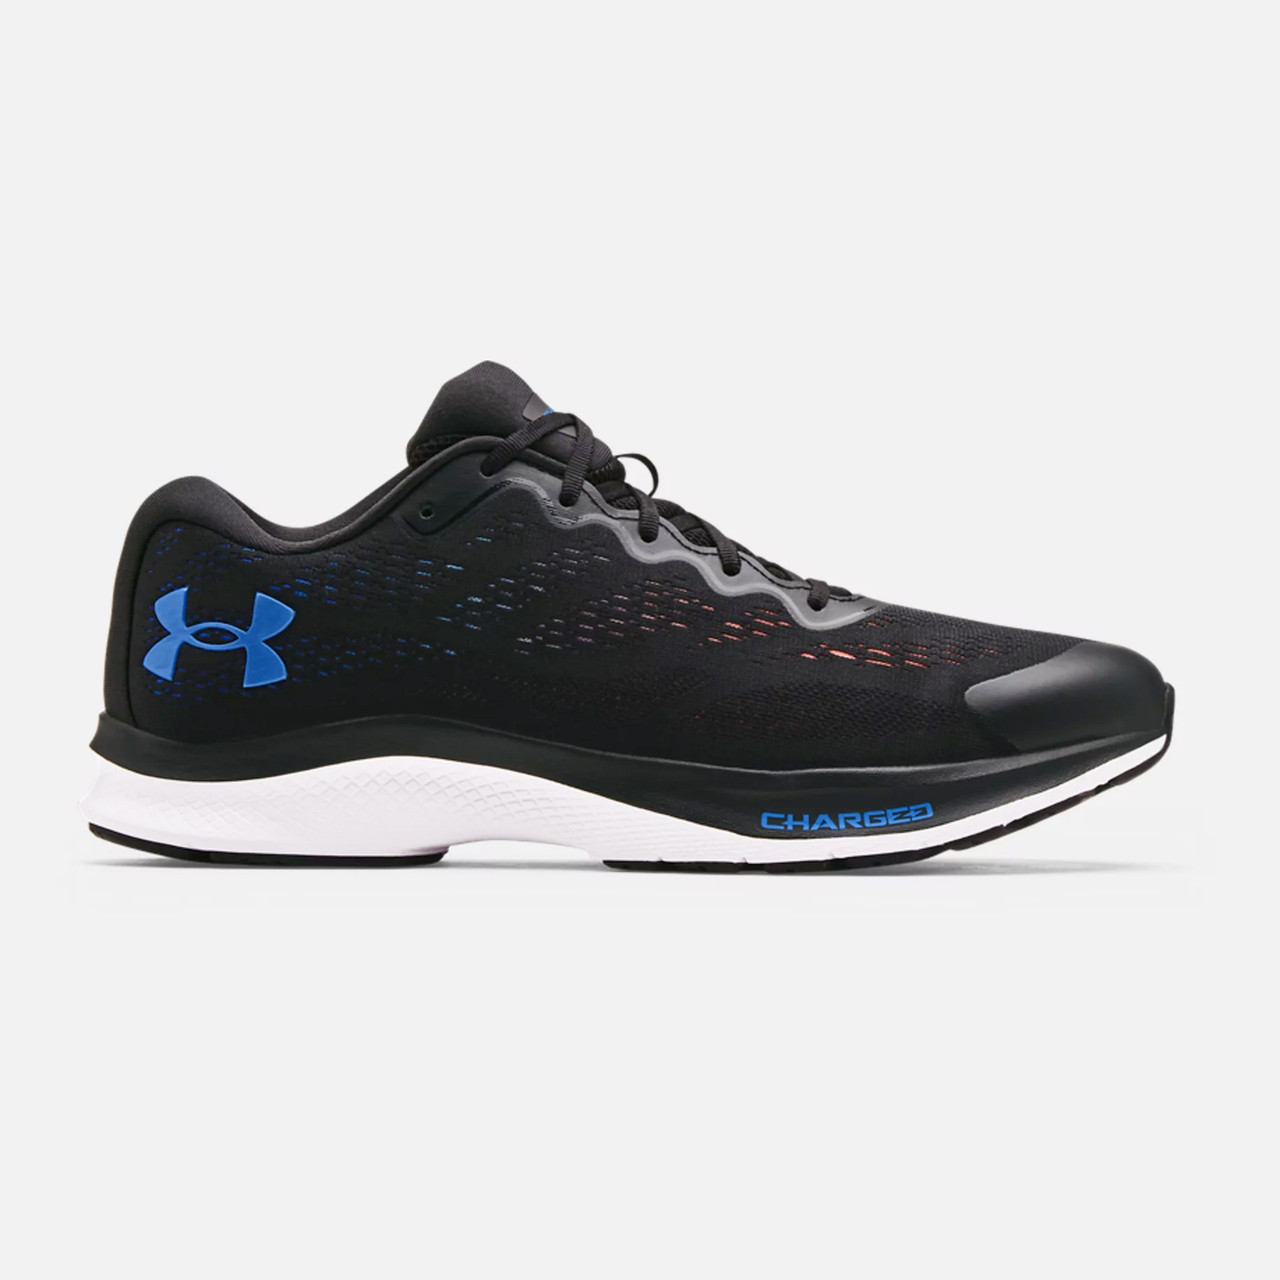 Under Armour Mens Charged Bandit 6 Running Shoe